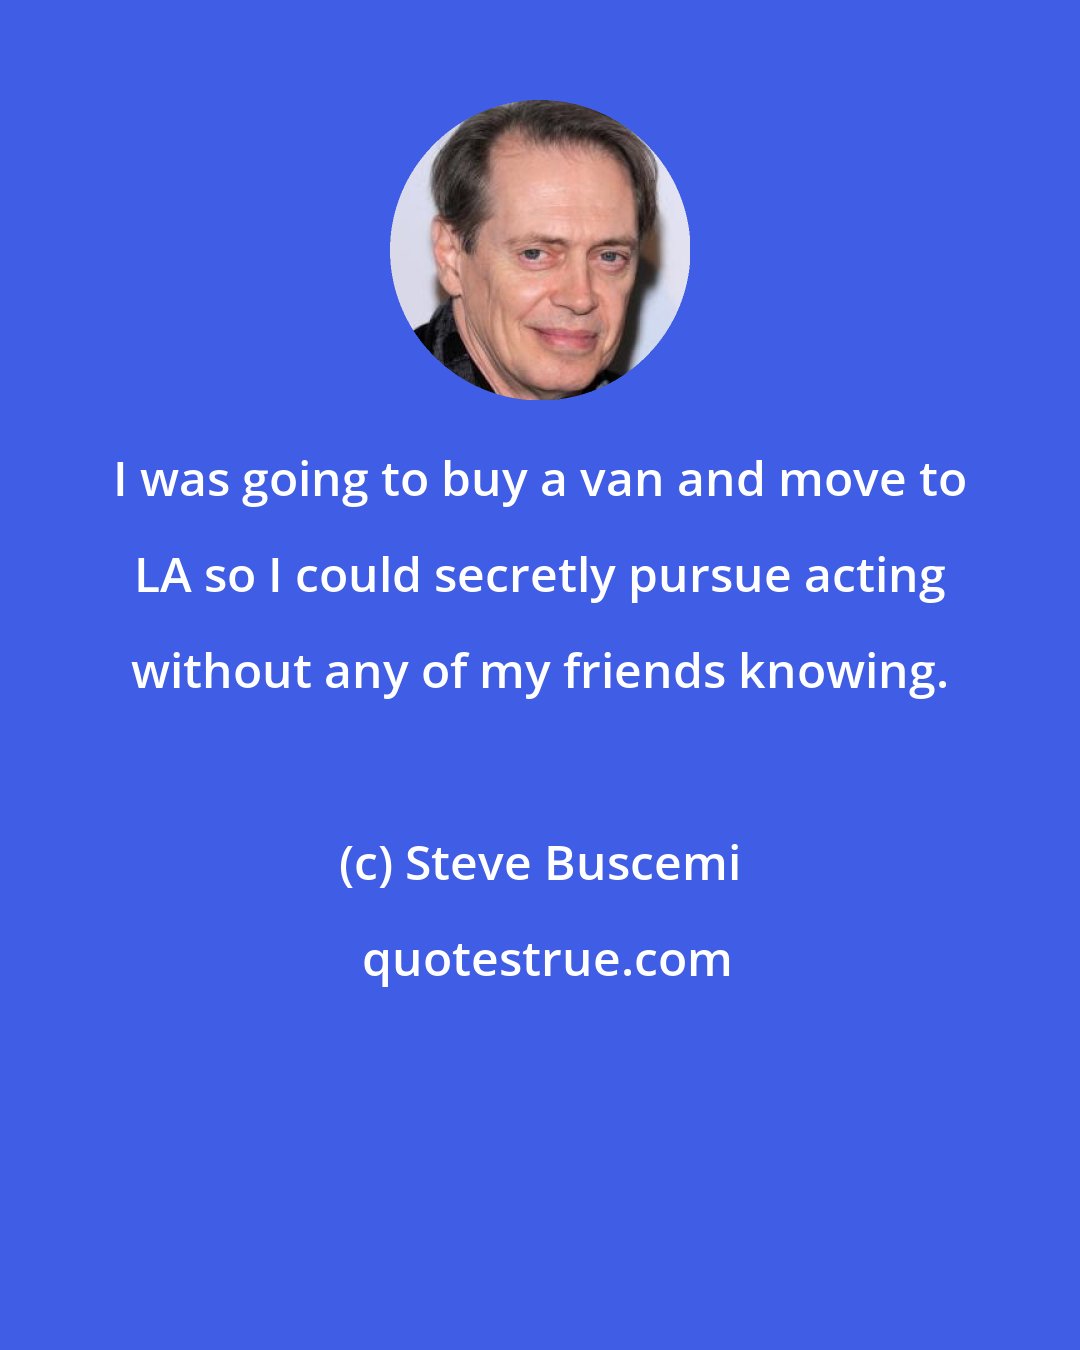 Steve Buscemi: I was going to buy a van and move to LA so I could secretly pursue acting without any of my friends knowing.